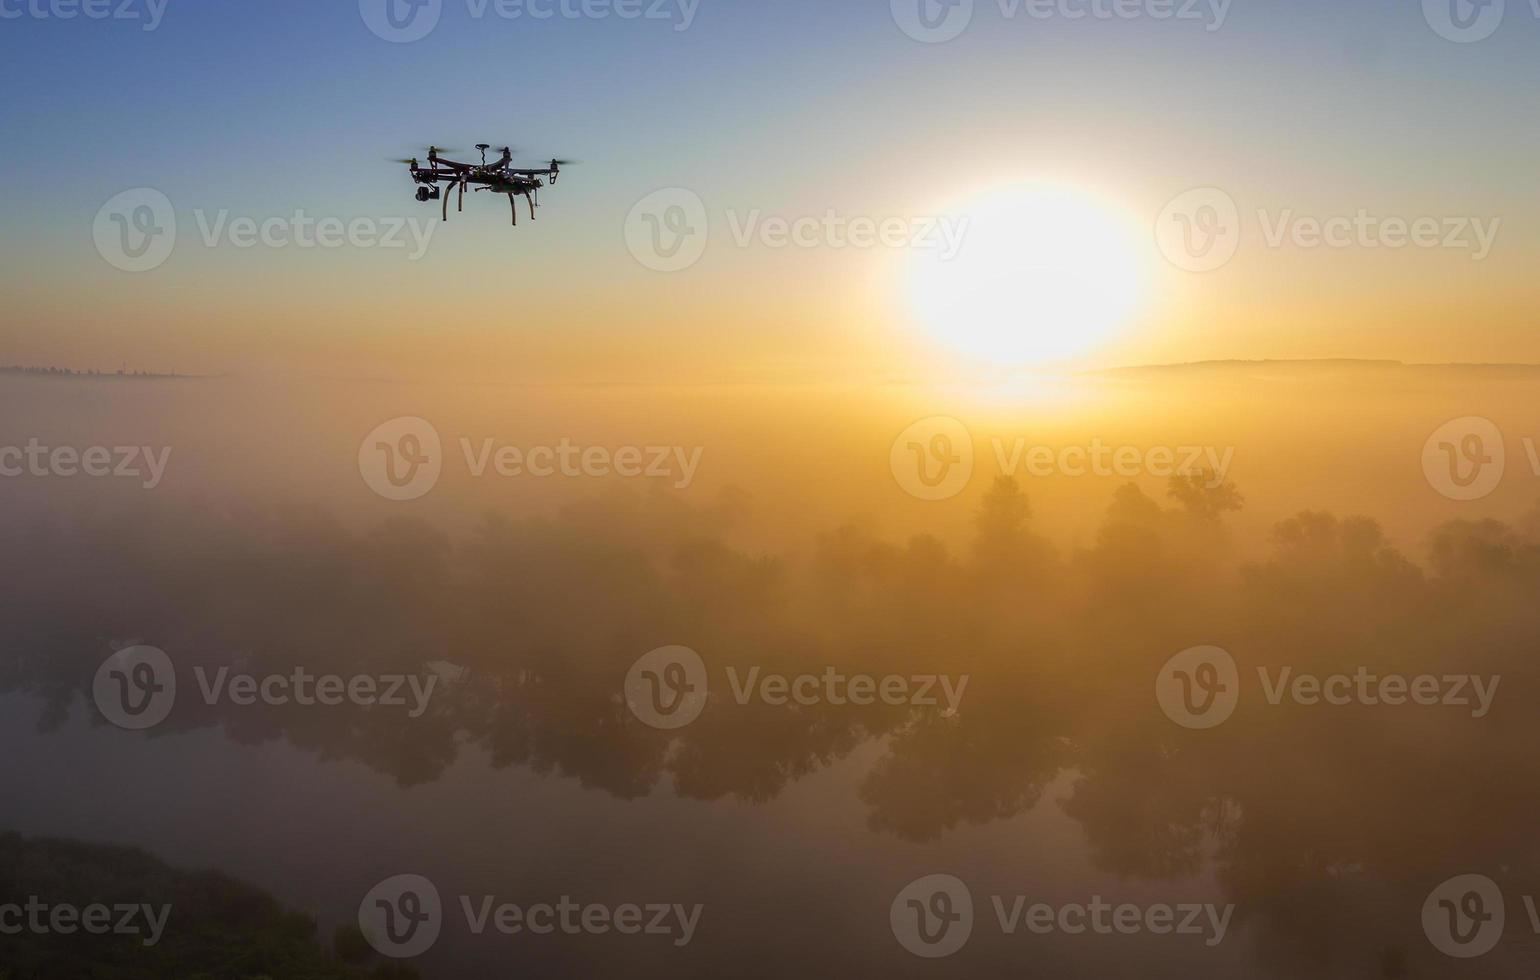 Hexacopter drone over foggy sunrise on river photo